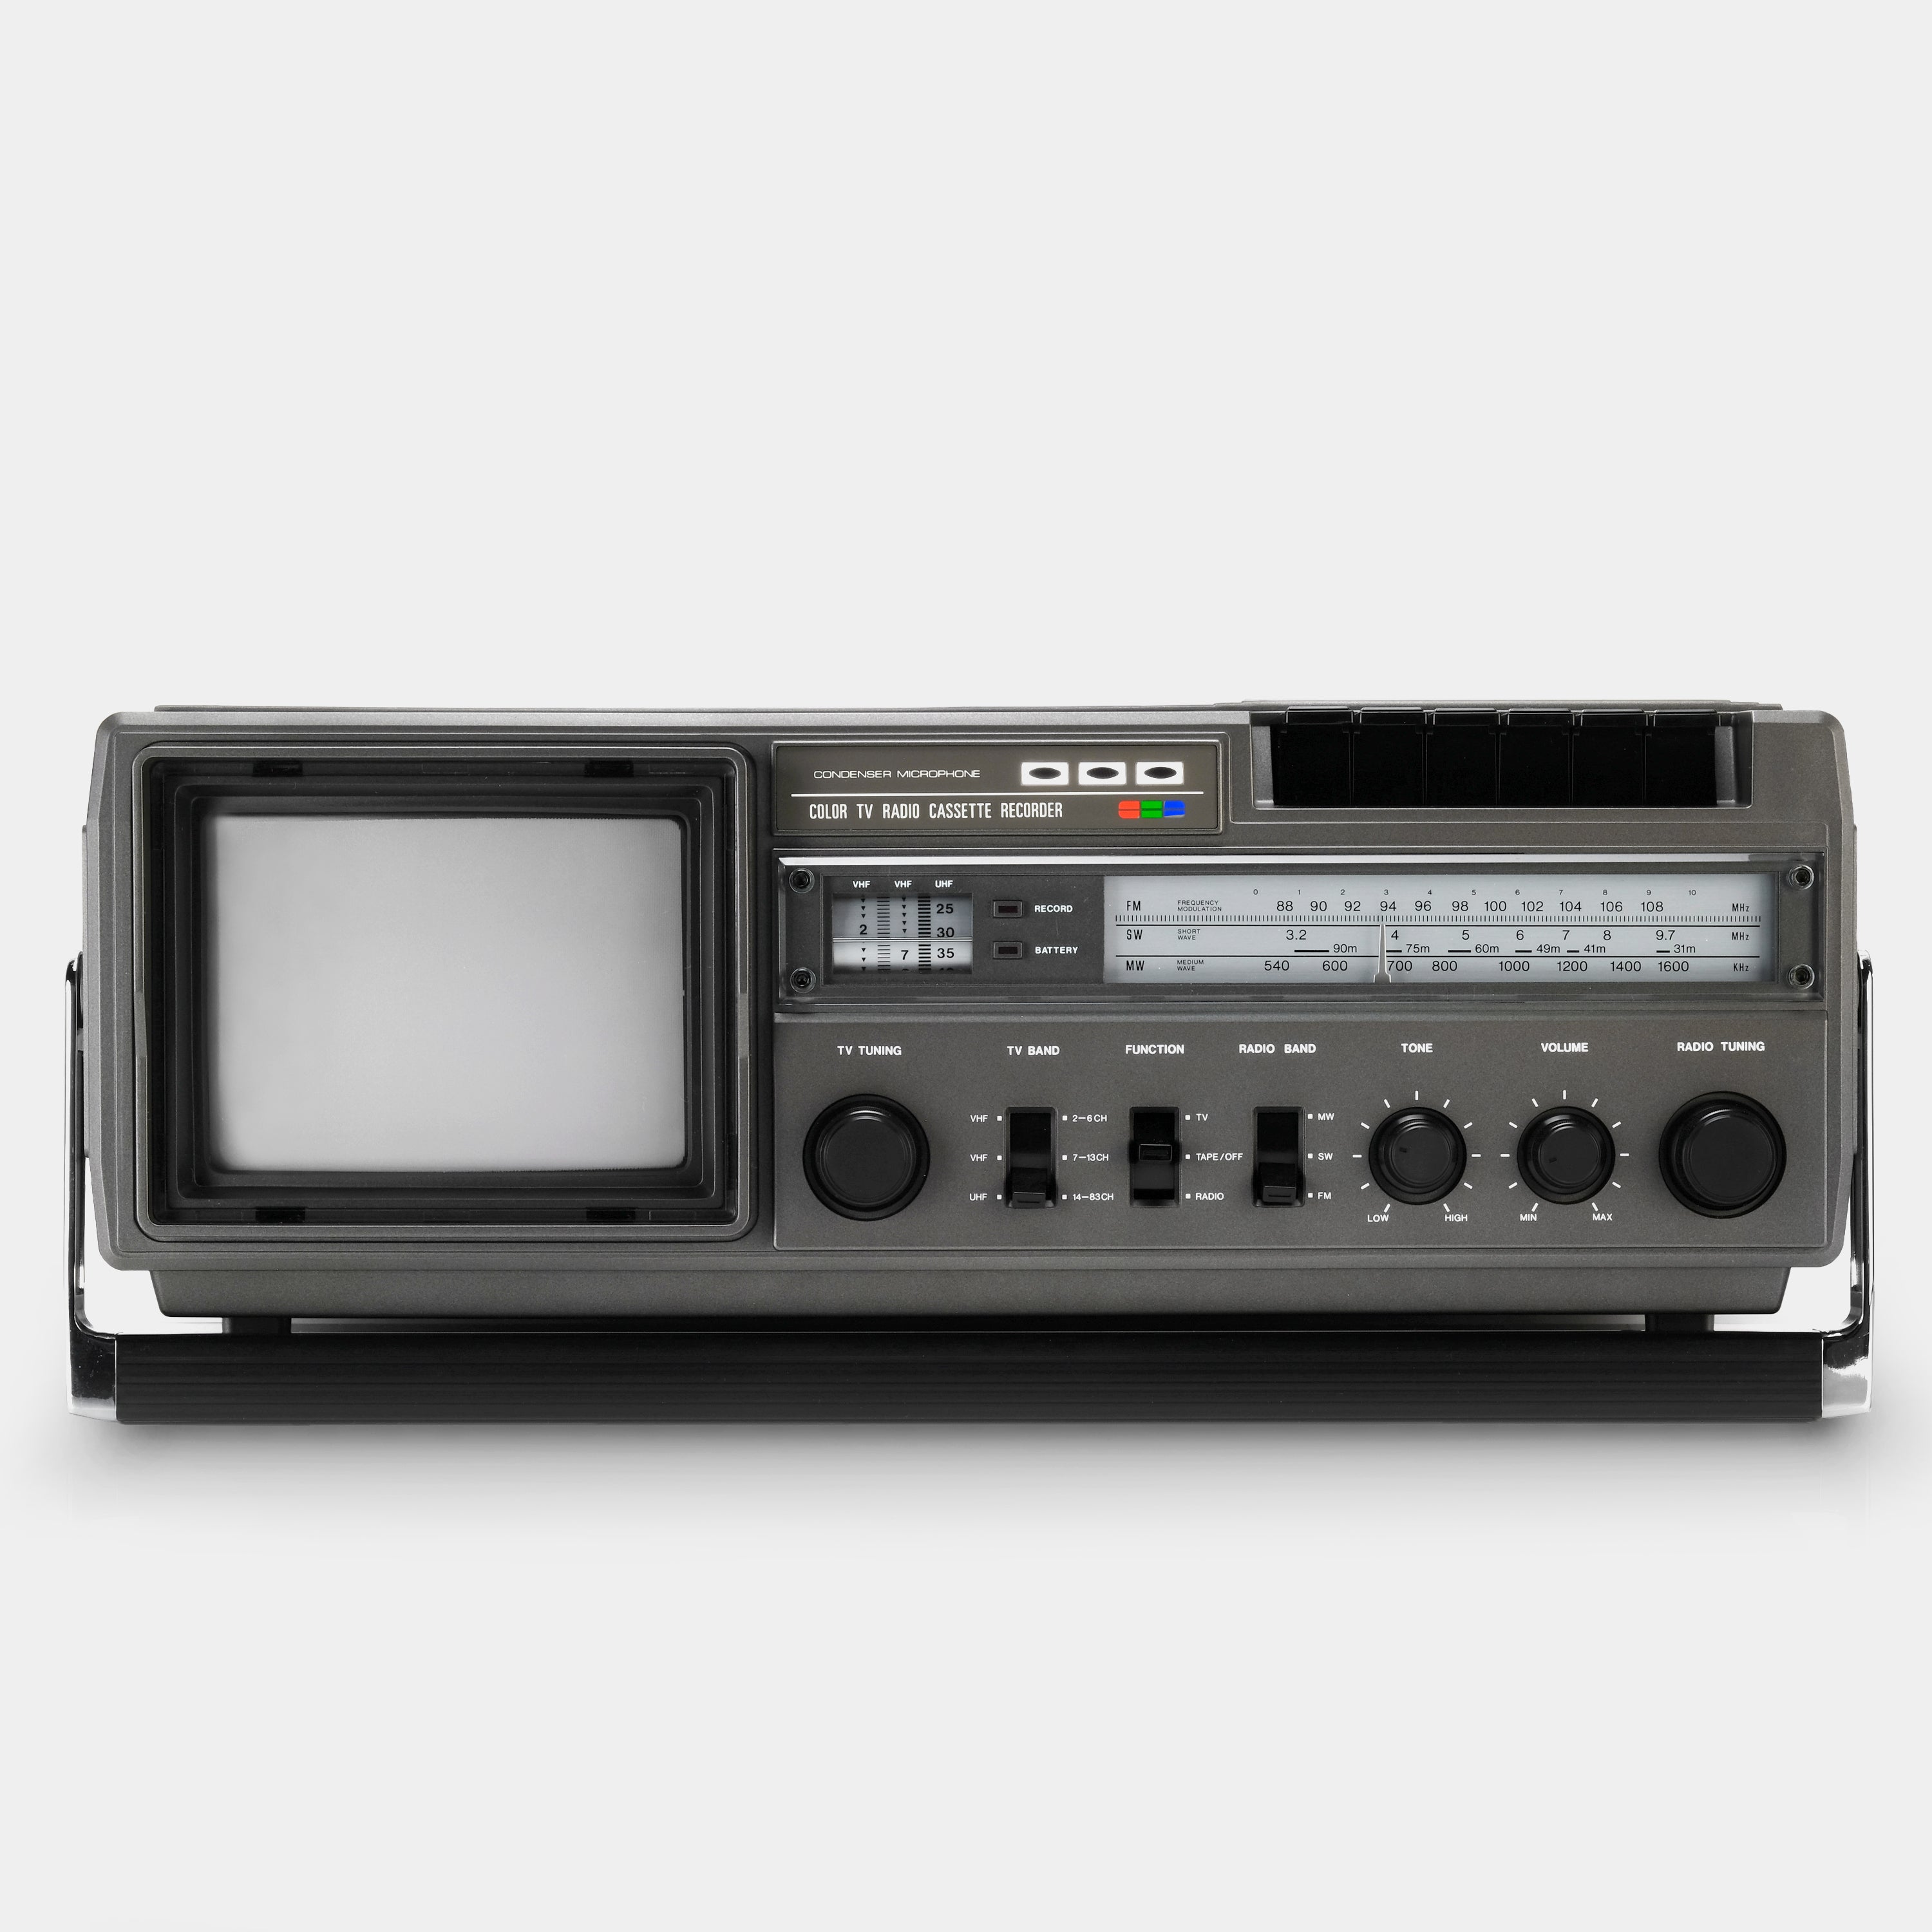 Broksonic by Otake CCIRT-3627 5.5 Inch Color TV with MW/FM/SW Radio and Cassette Recorder (Refurbished)